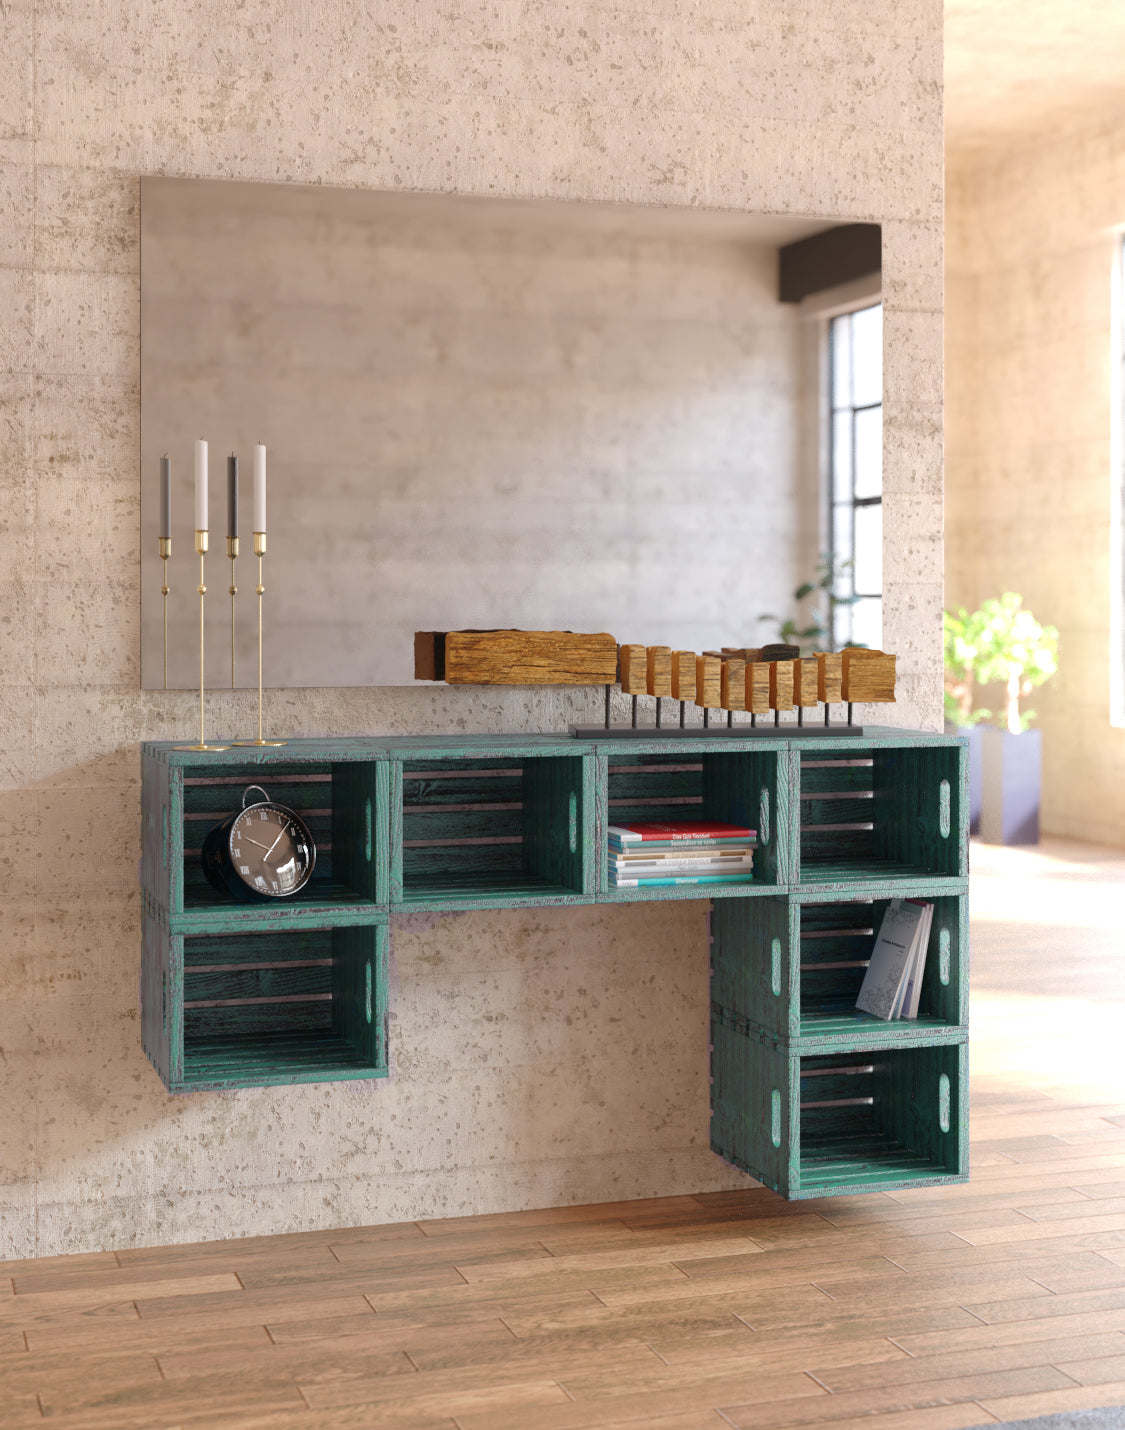 Kapoor Console Modular And real wood furniture product